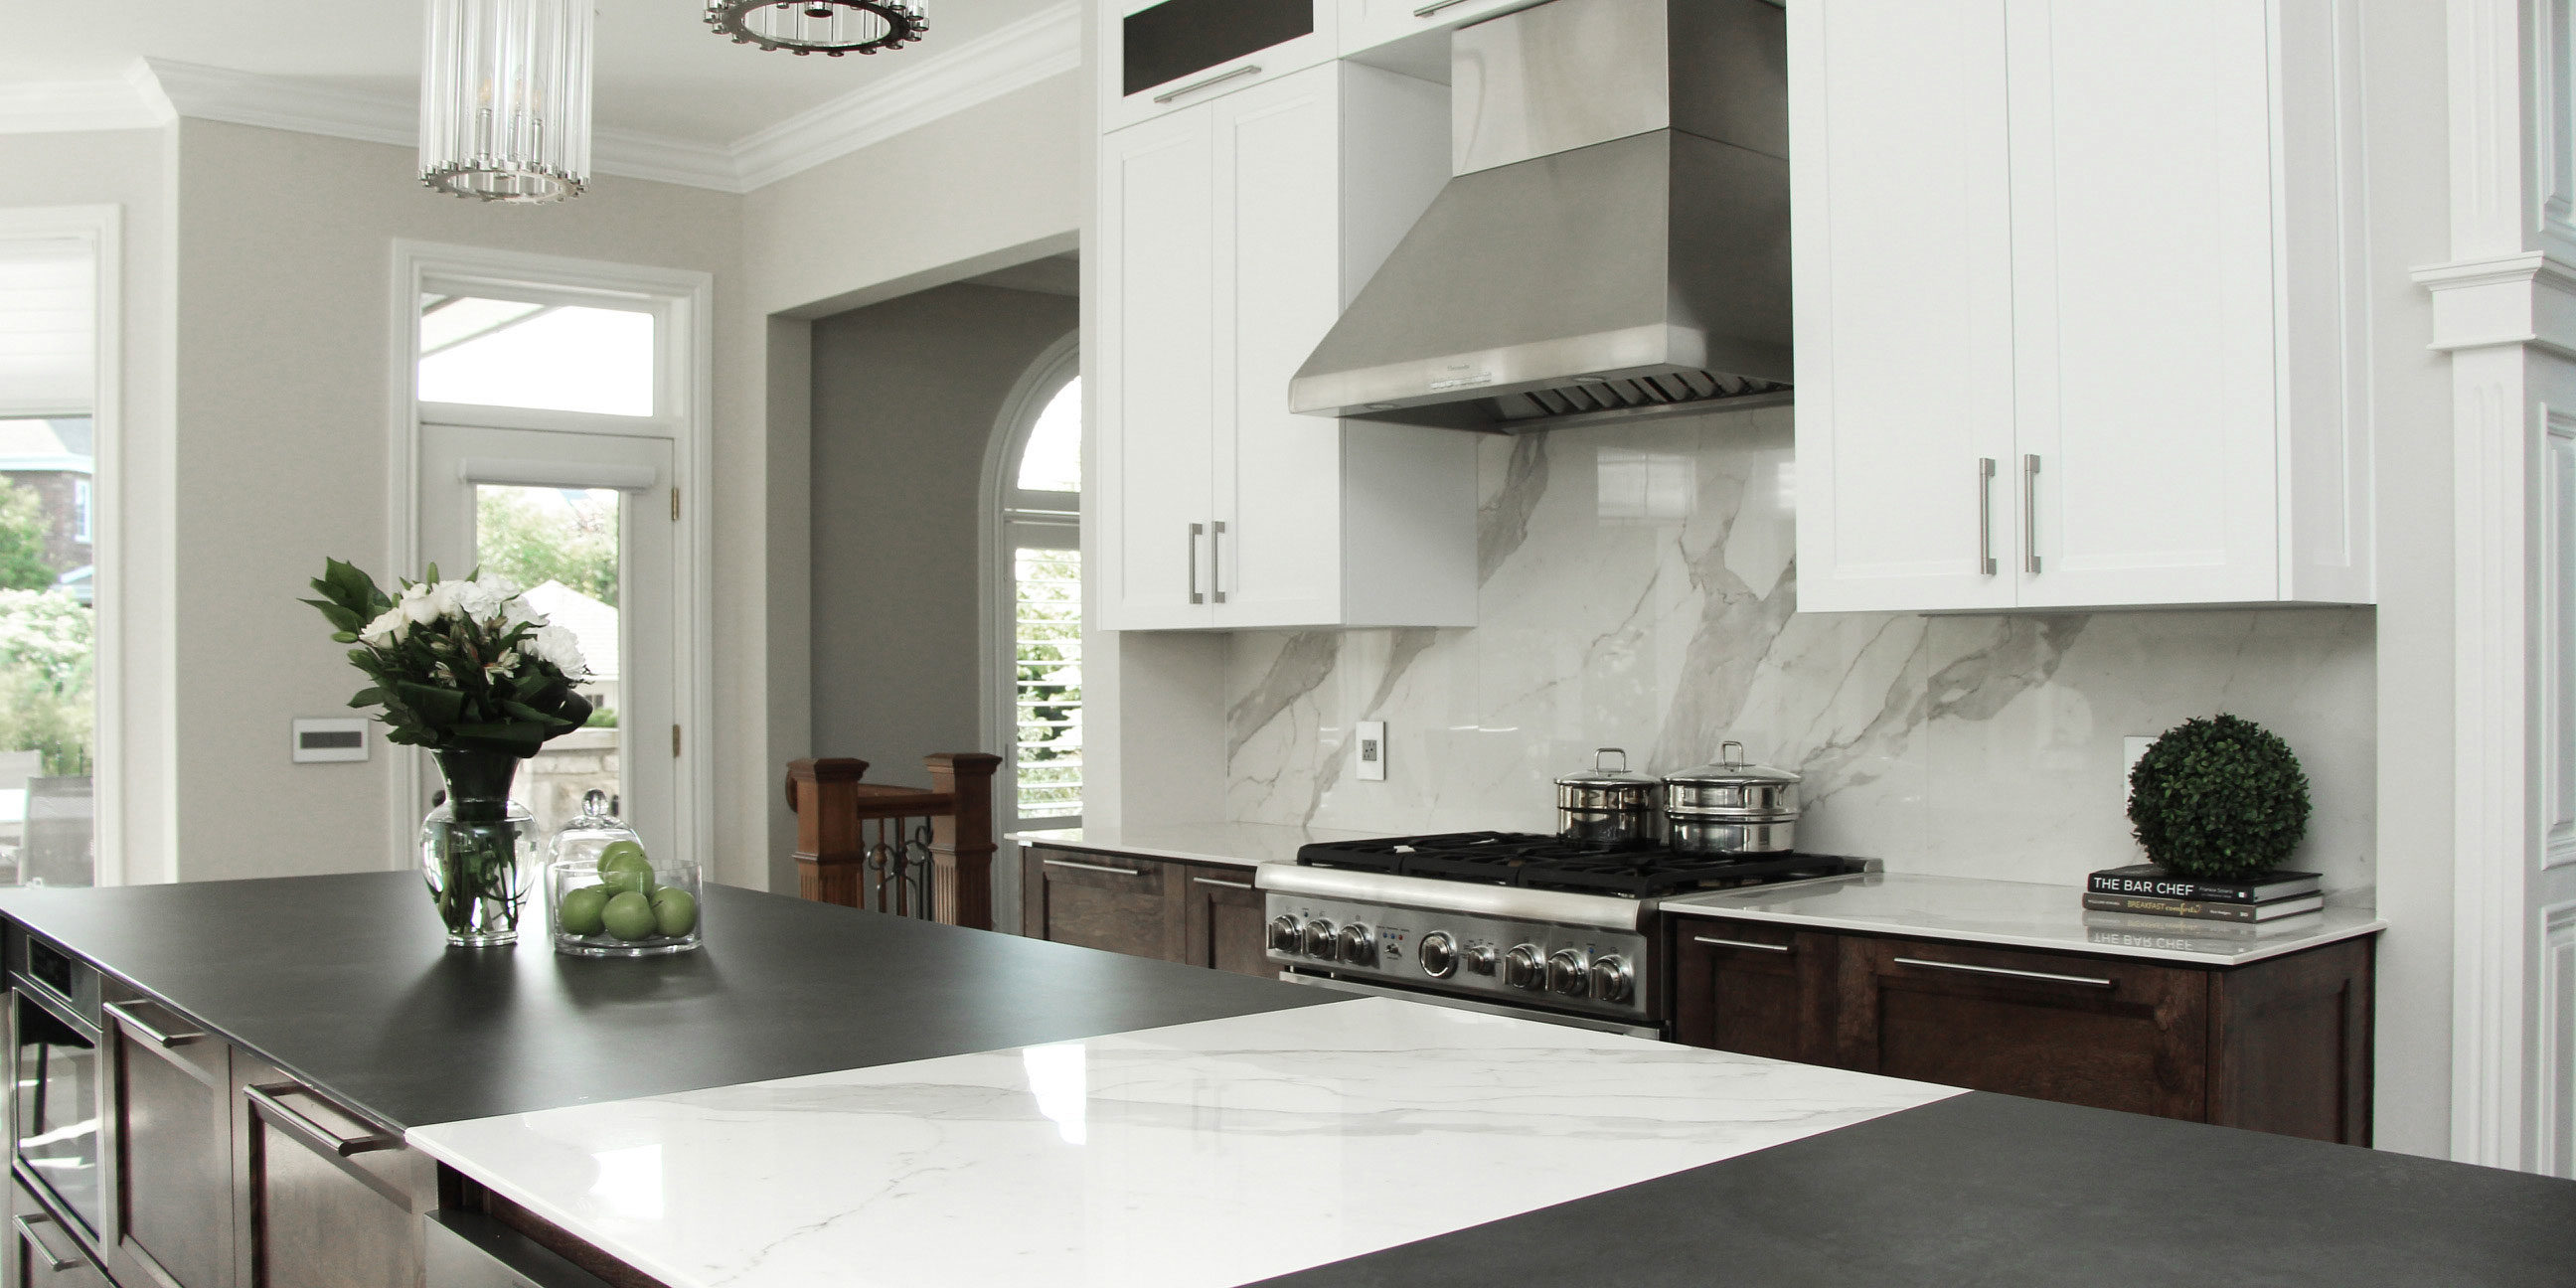 Stone Slab Countertops The 5 Best, What Is The Best Option For Kitchen Countertops